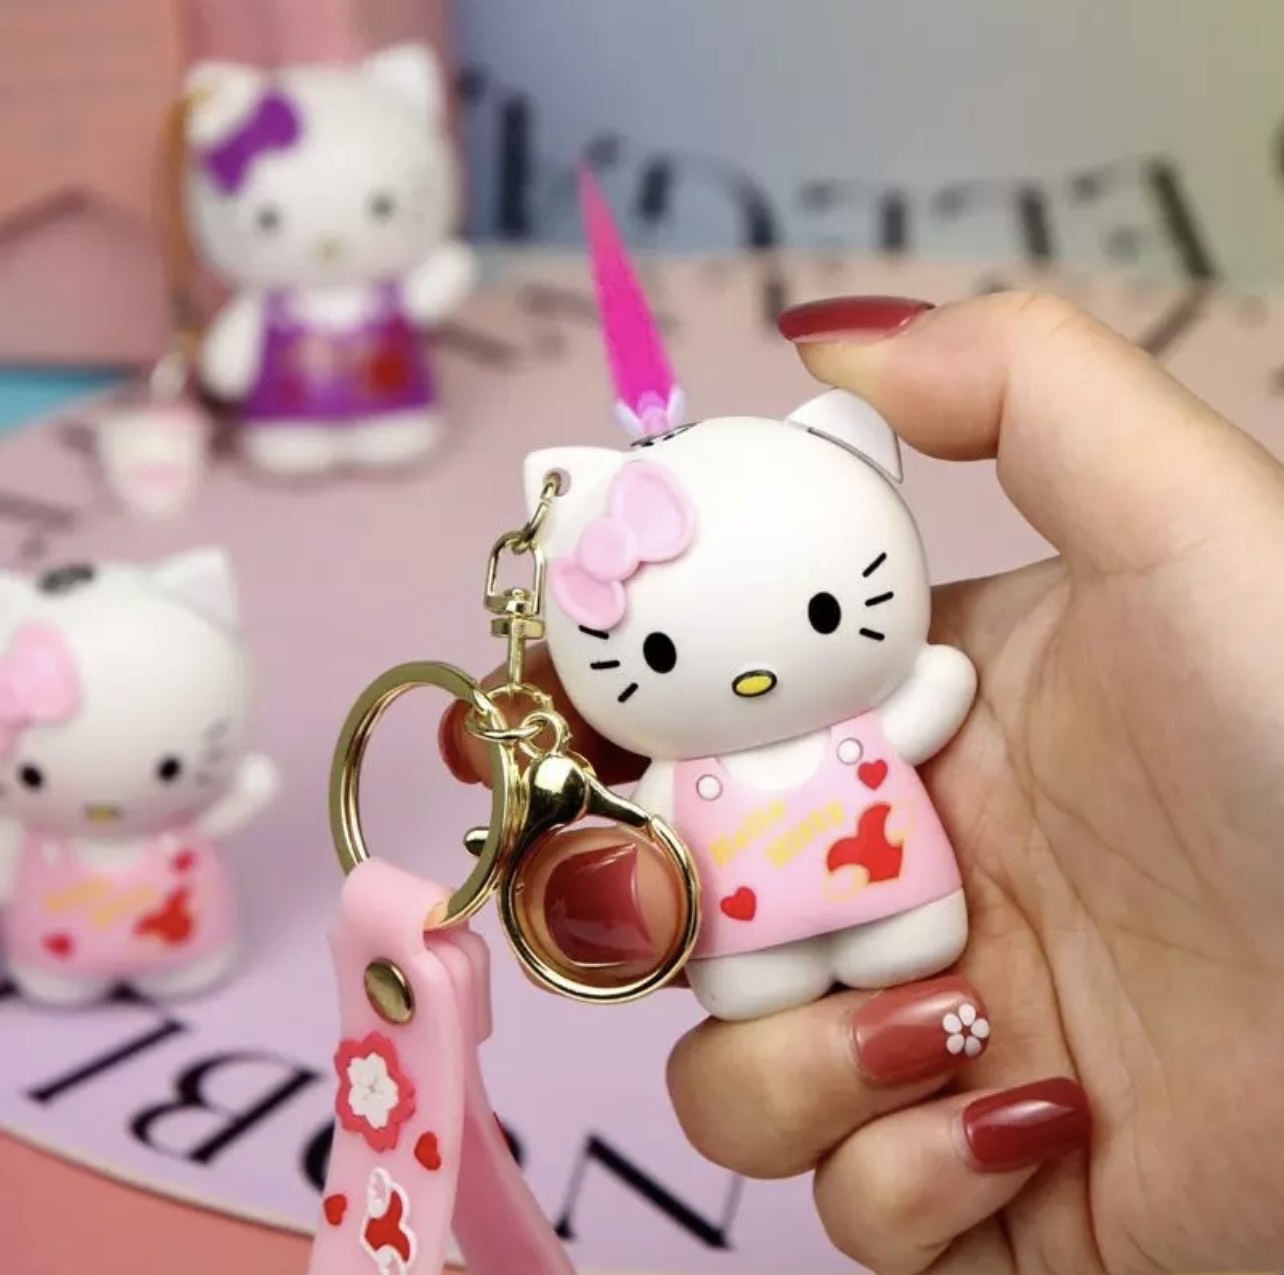 Kitty Pink Flame Keychain - Adorable Cartoon Cat Design White and Pink